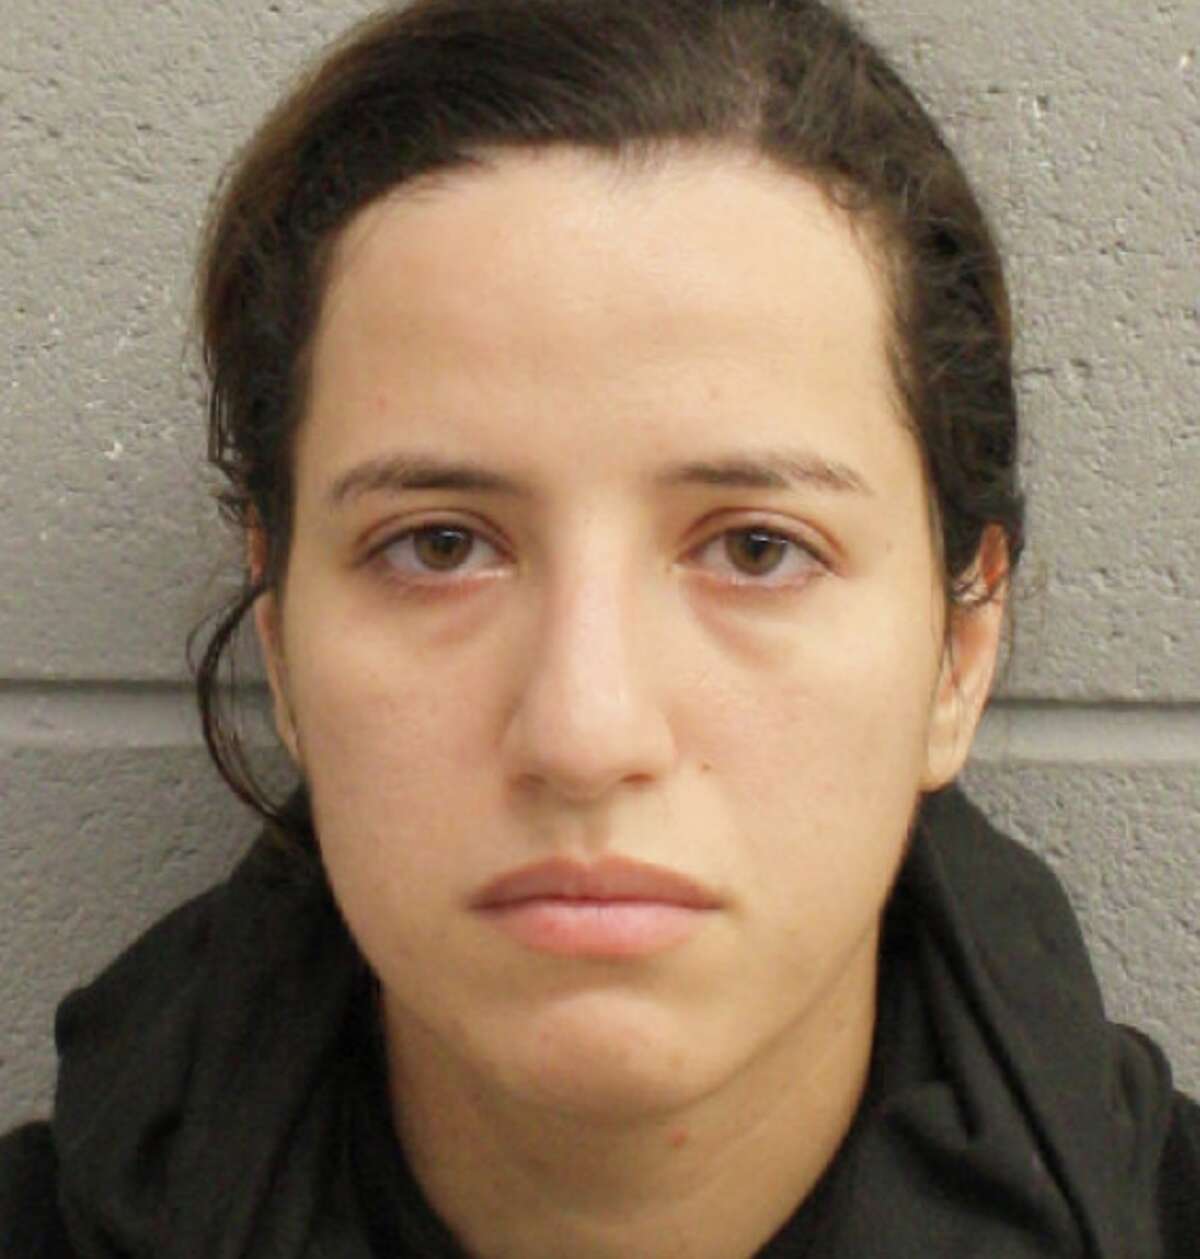 Ahlam Maleg, 29, was charged with state-jail felony child endangerment after allegedly leaving her child alone in a hot car while she shopped near Tomball on Saturday, Oct. 5, 2019.